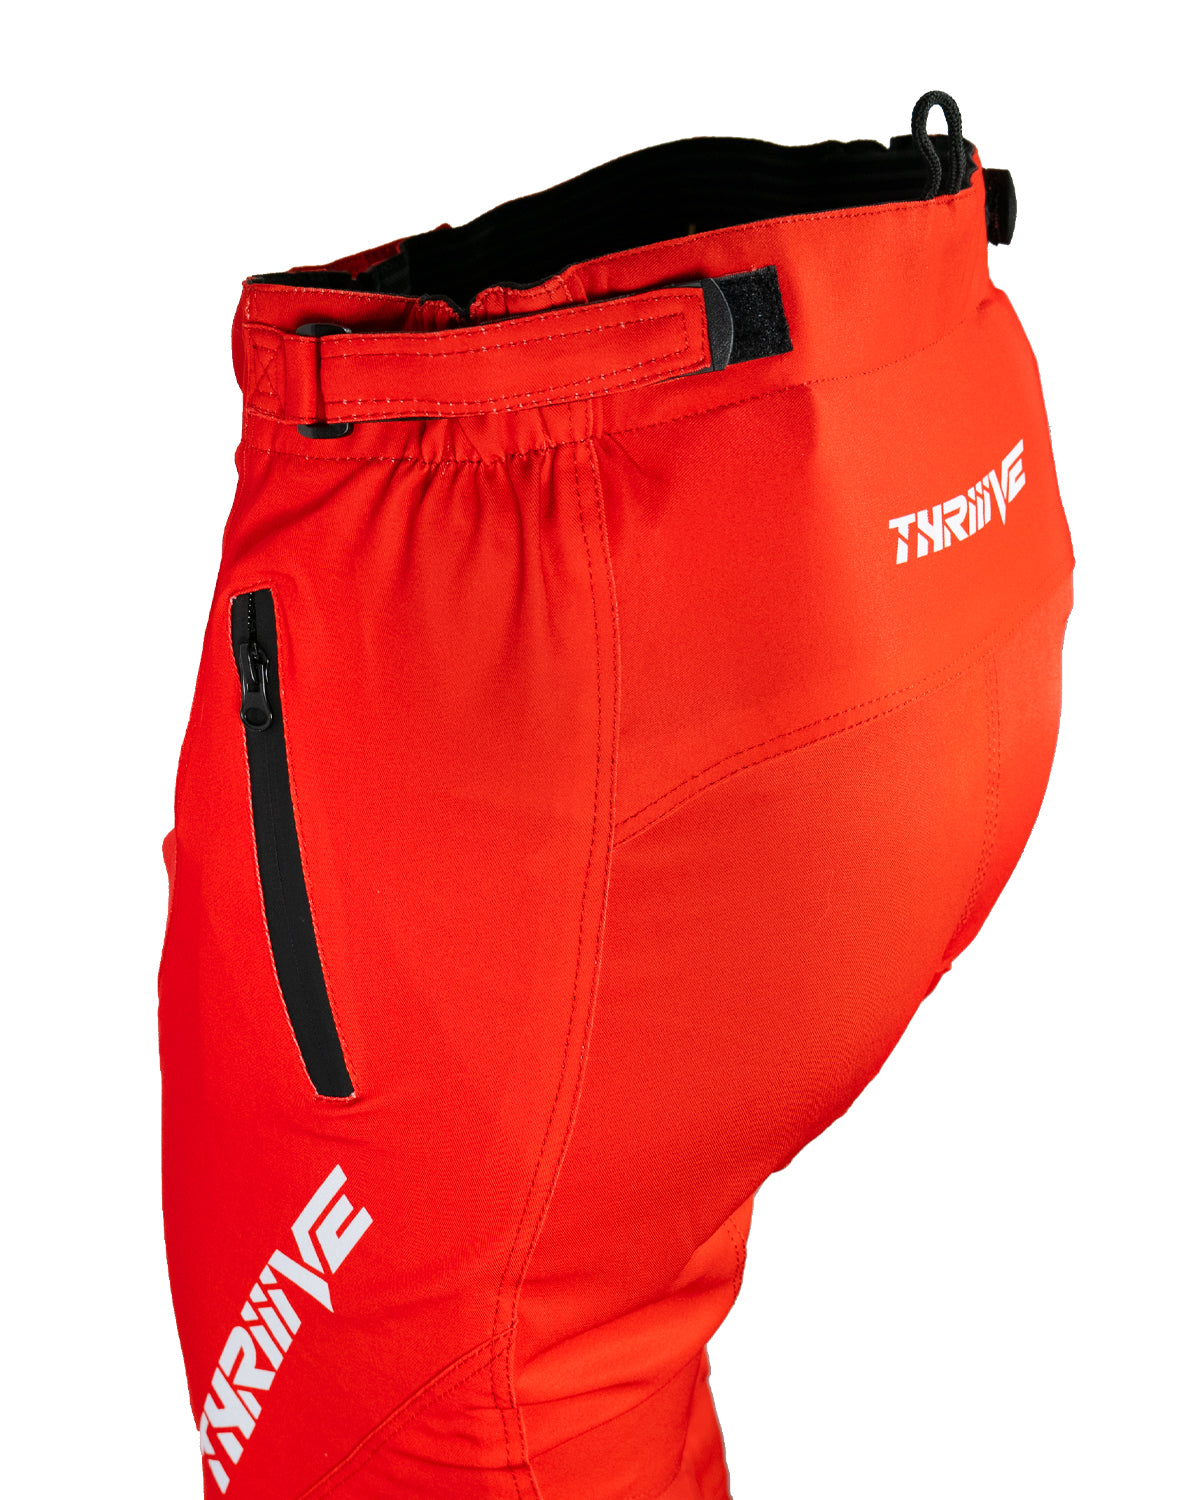 Elite Stretch Race Pants - Red